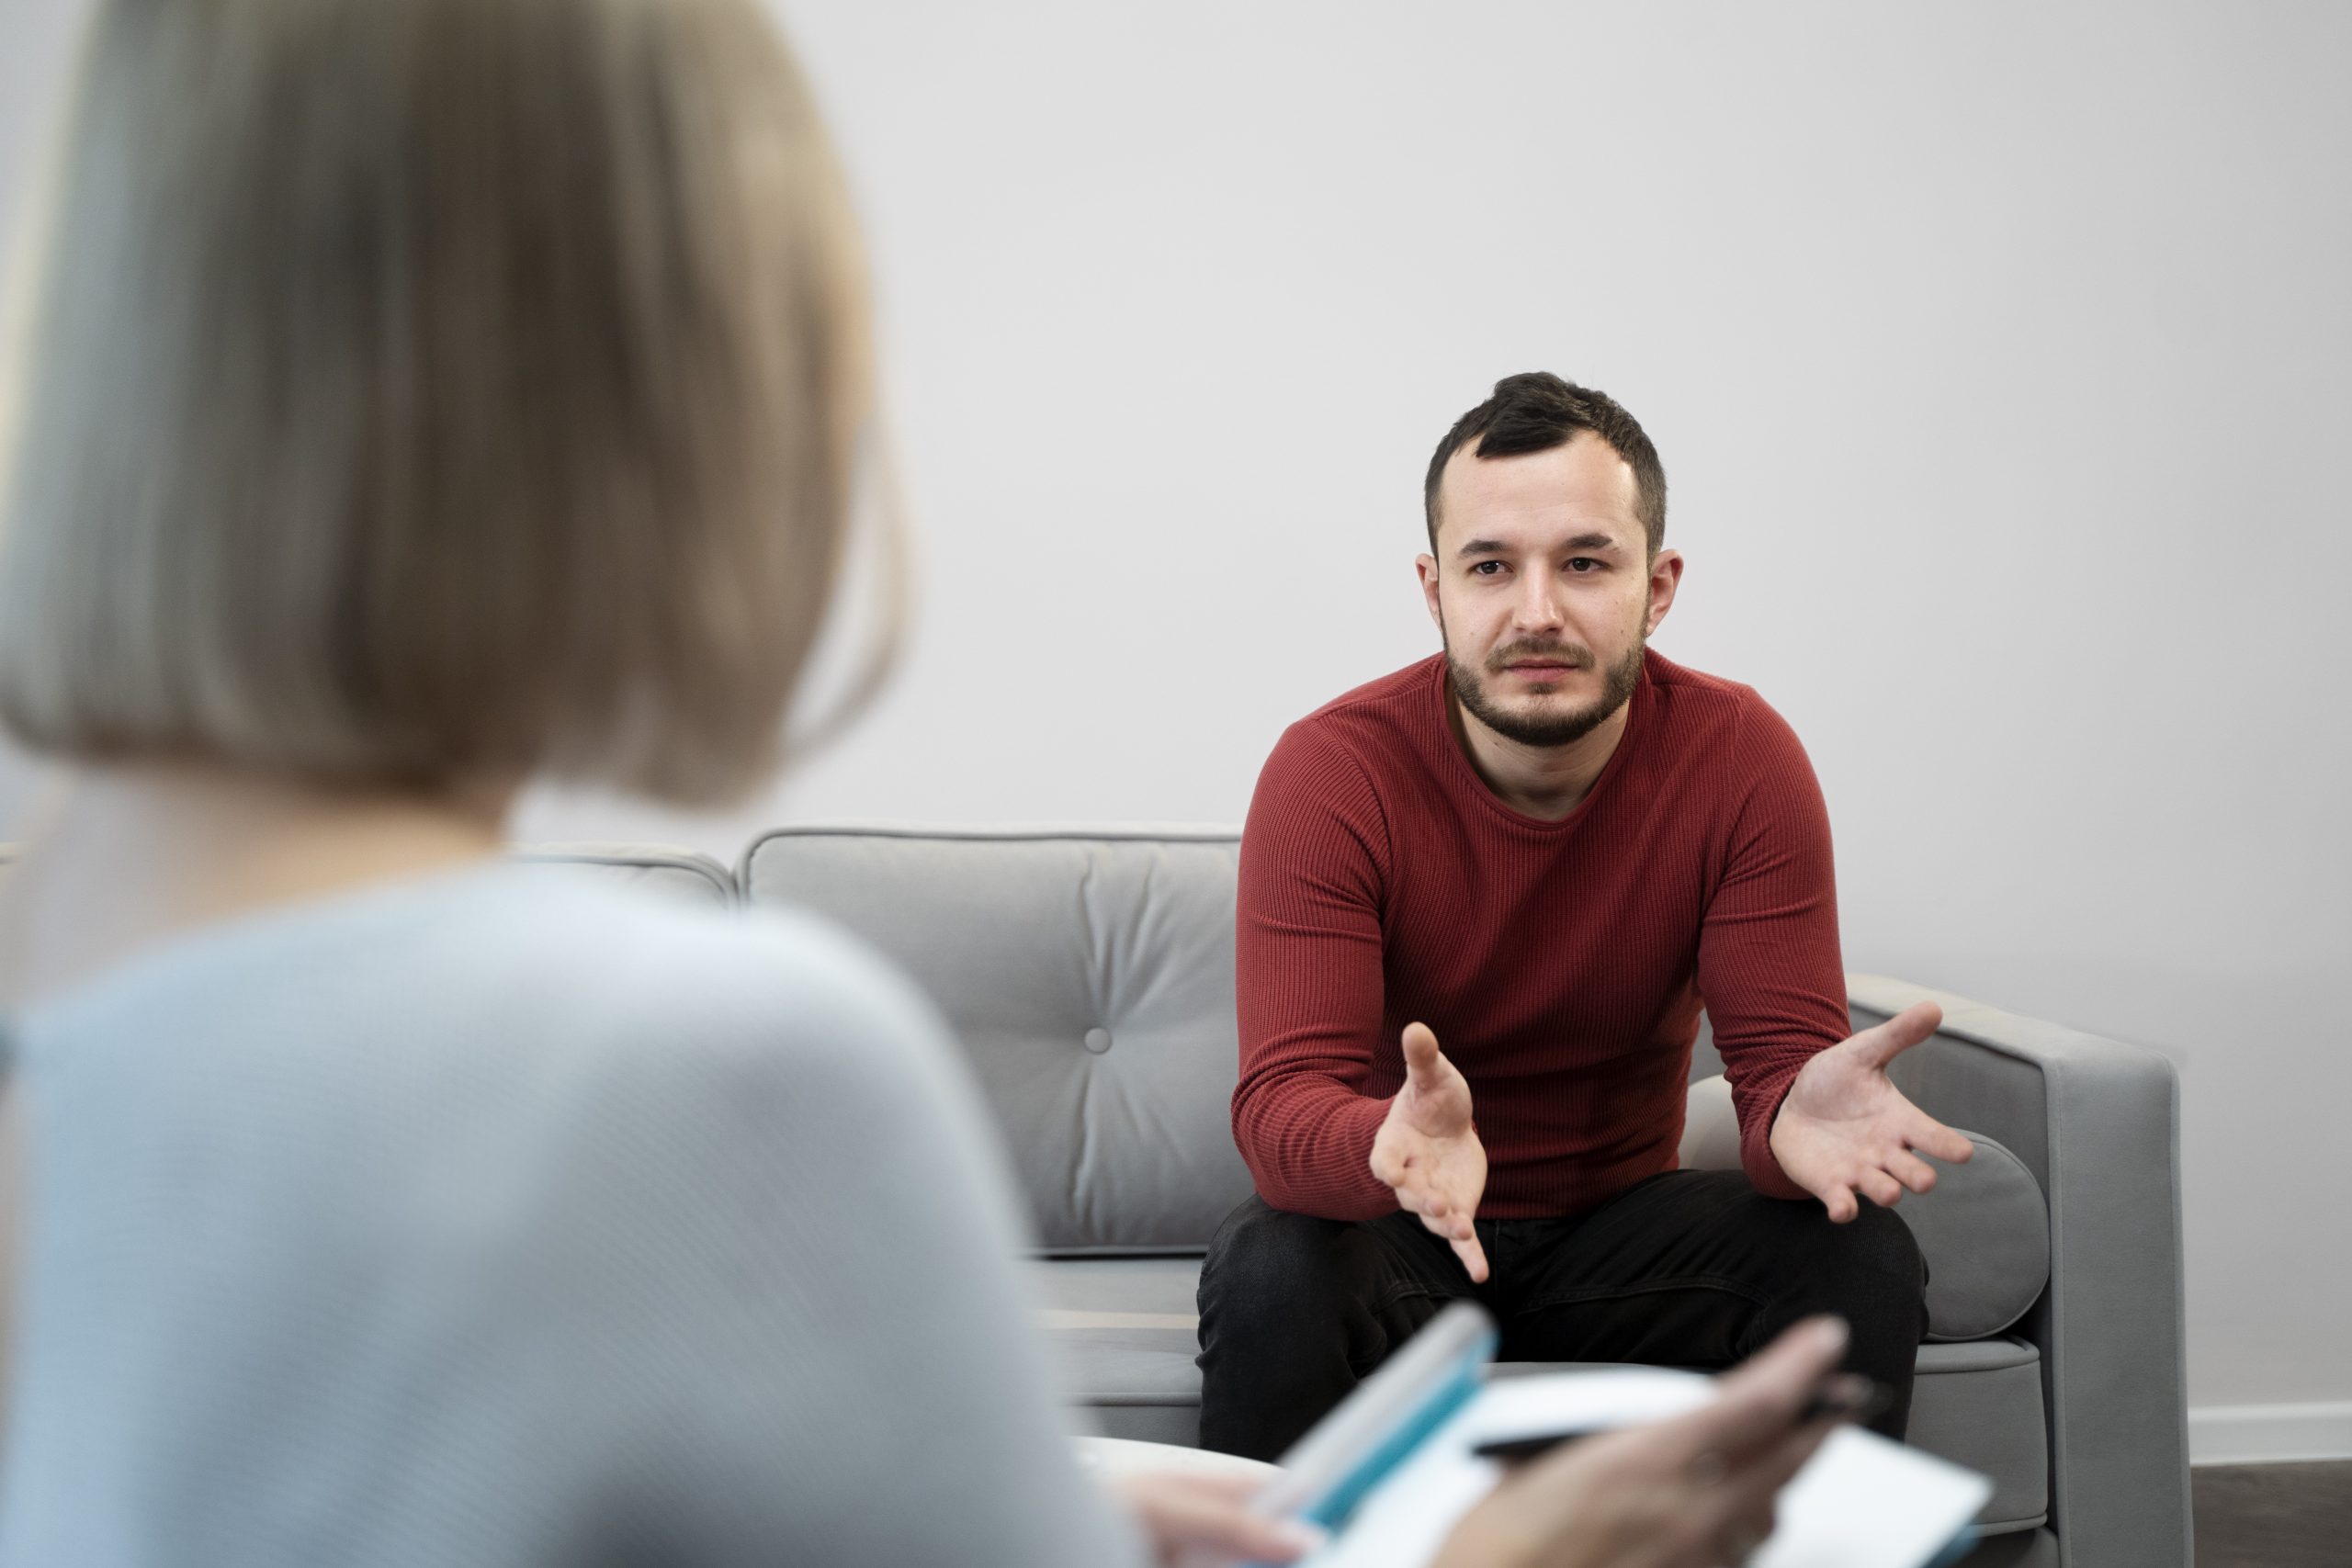 A client asking questions to the counsellor during a counselling session. Asking questions can help in choosing the right counsellor!